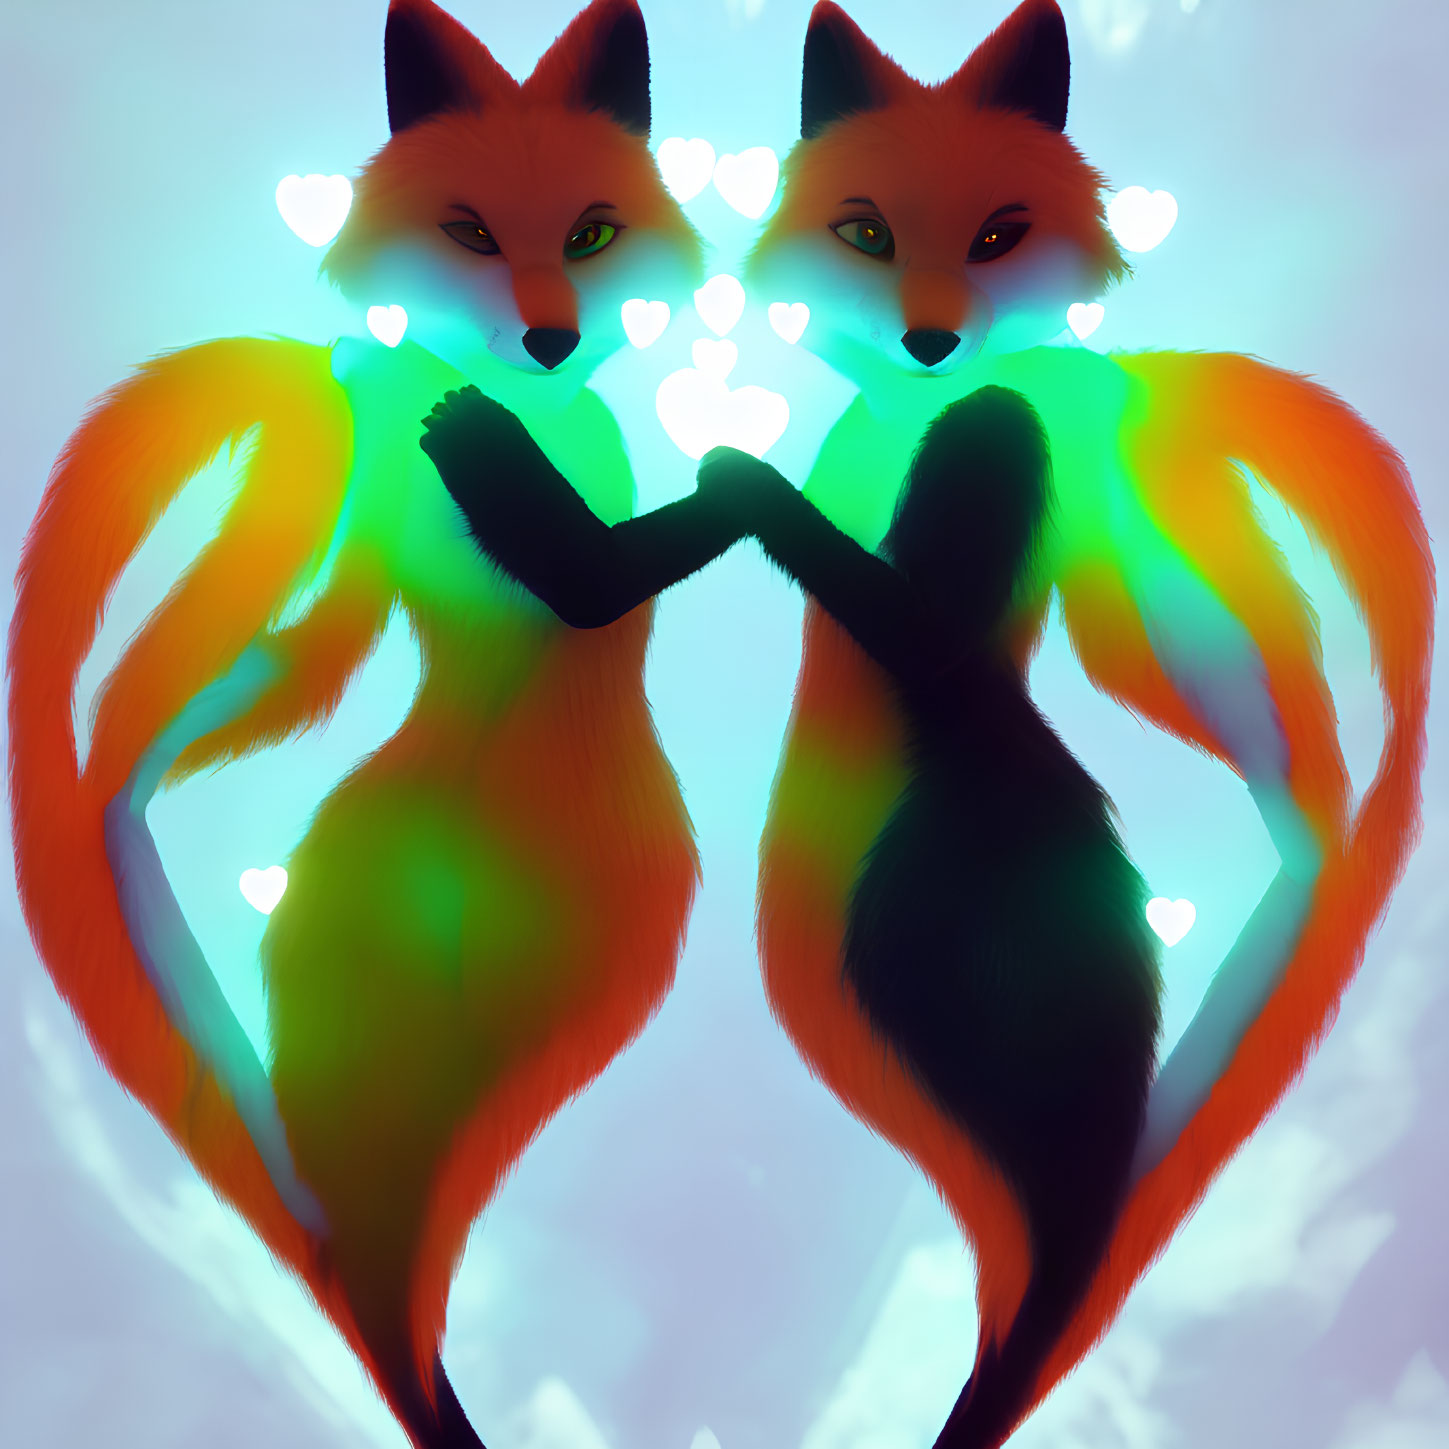 Symmetrical neon foxes on soft-lit background with hearts